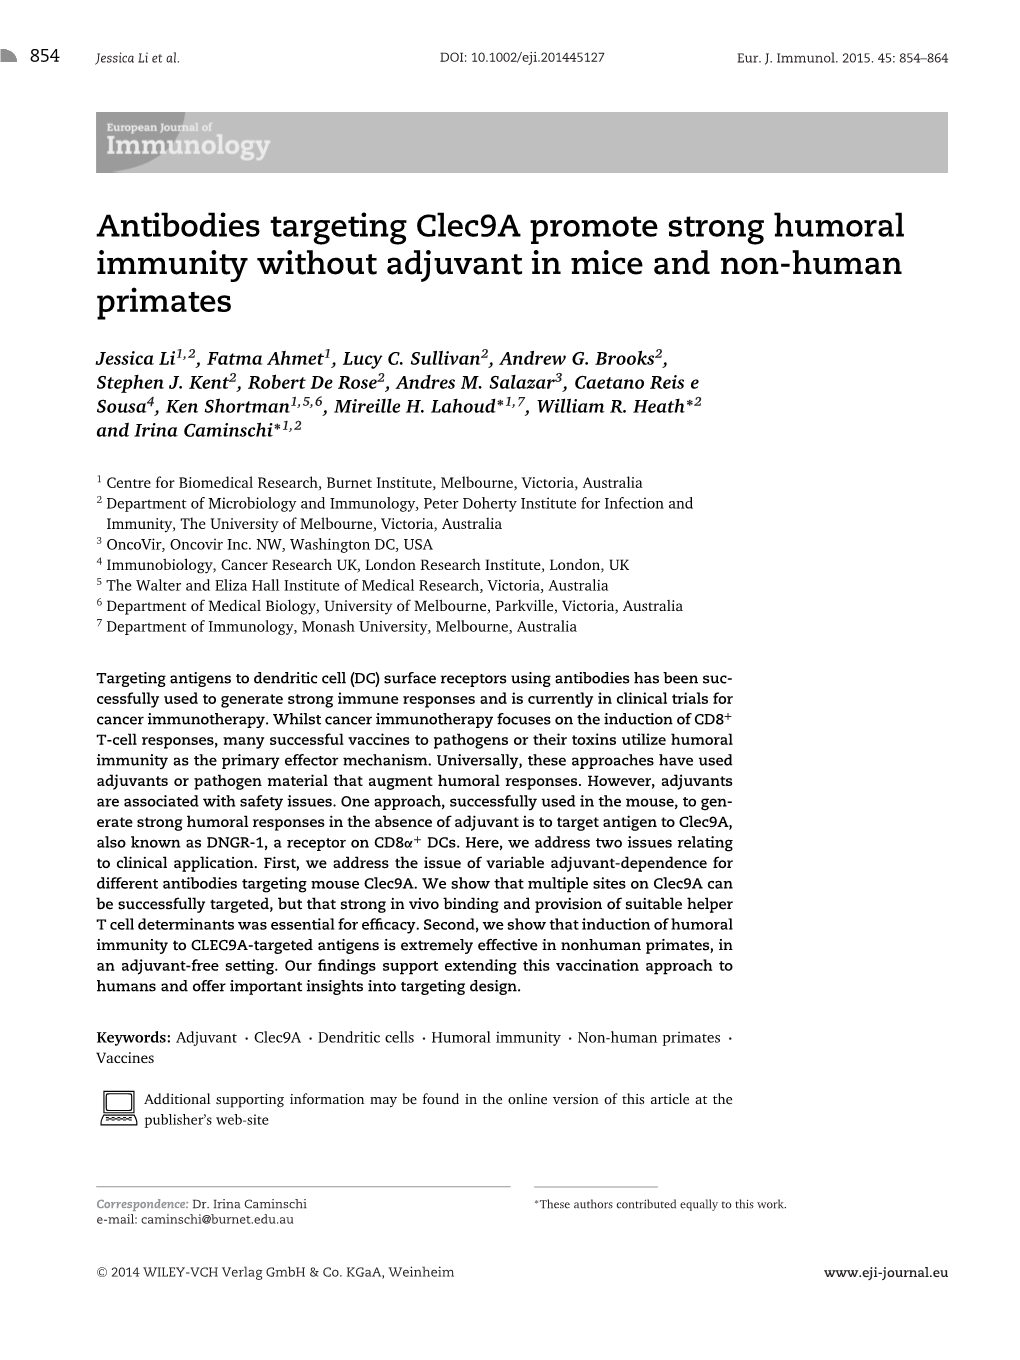 Antibodies Targeting Clec9a Promote Strong Humoral Immunity Without Adjuvant in Mice and Non-Human Primates